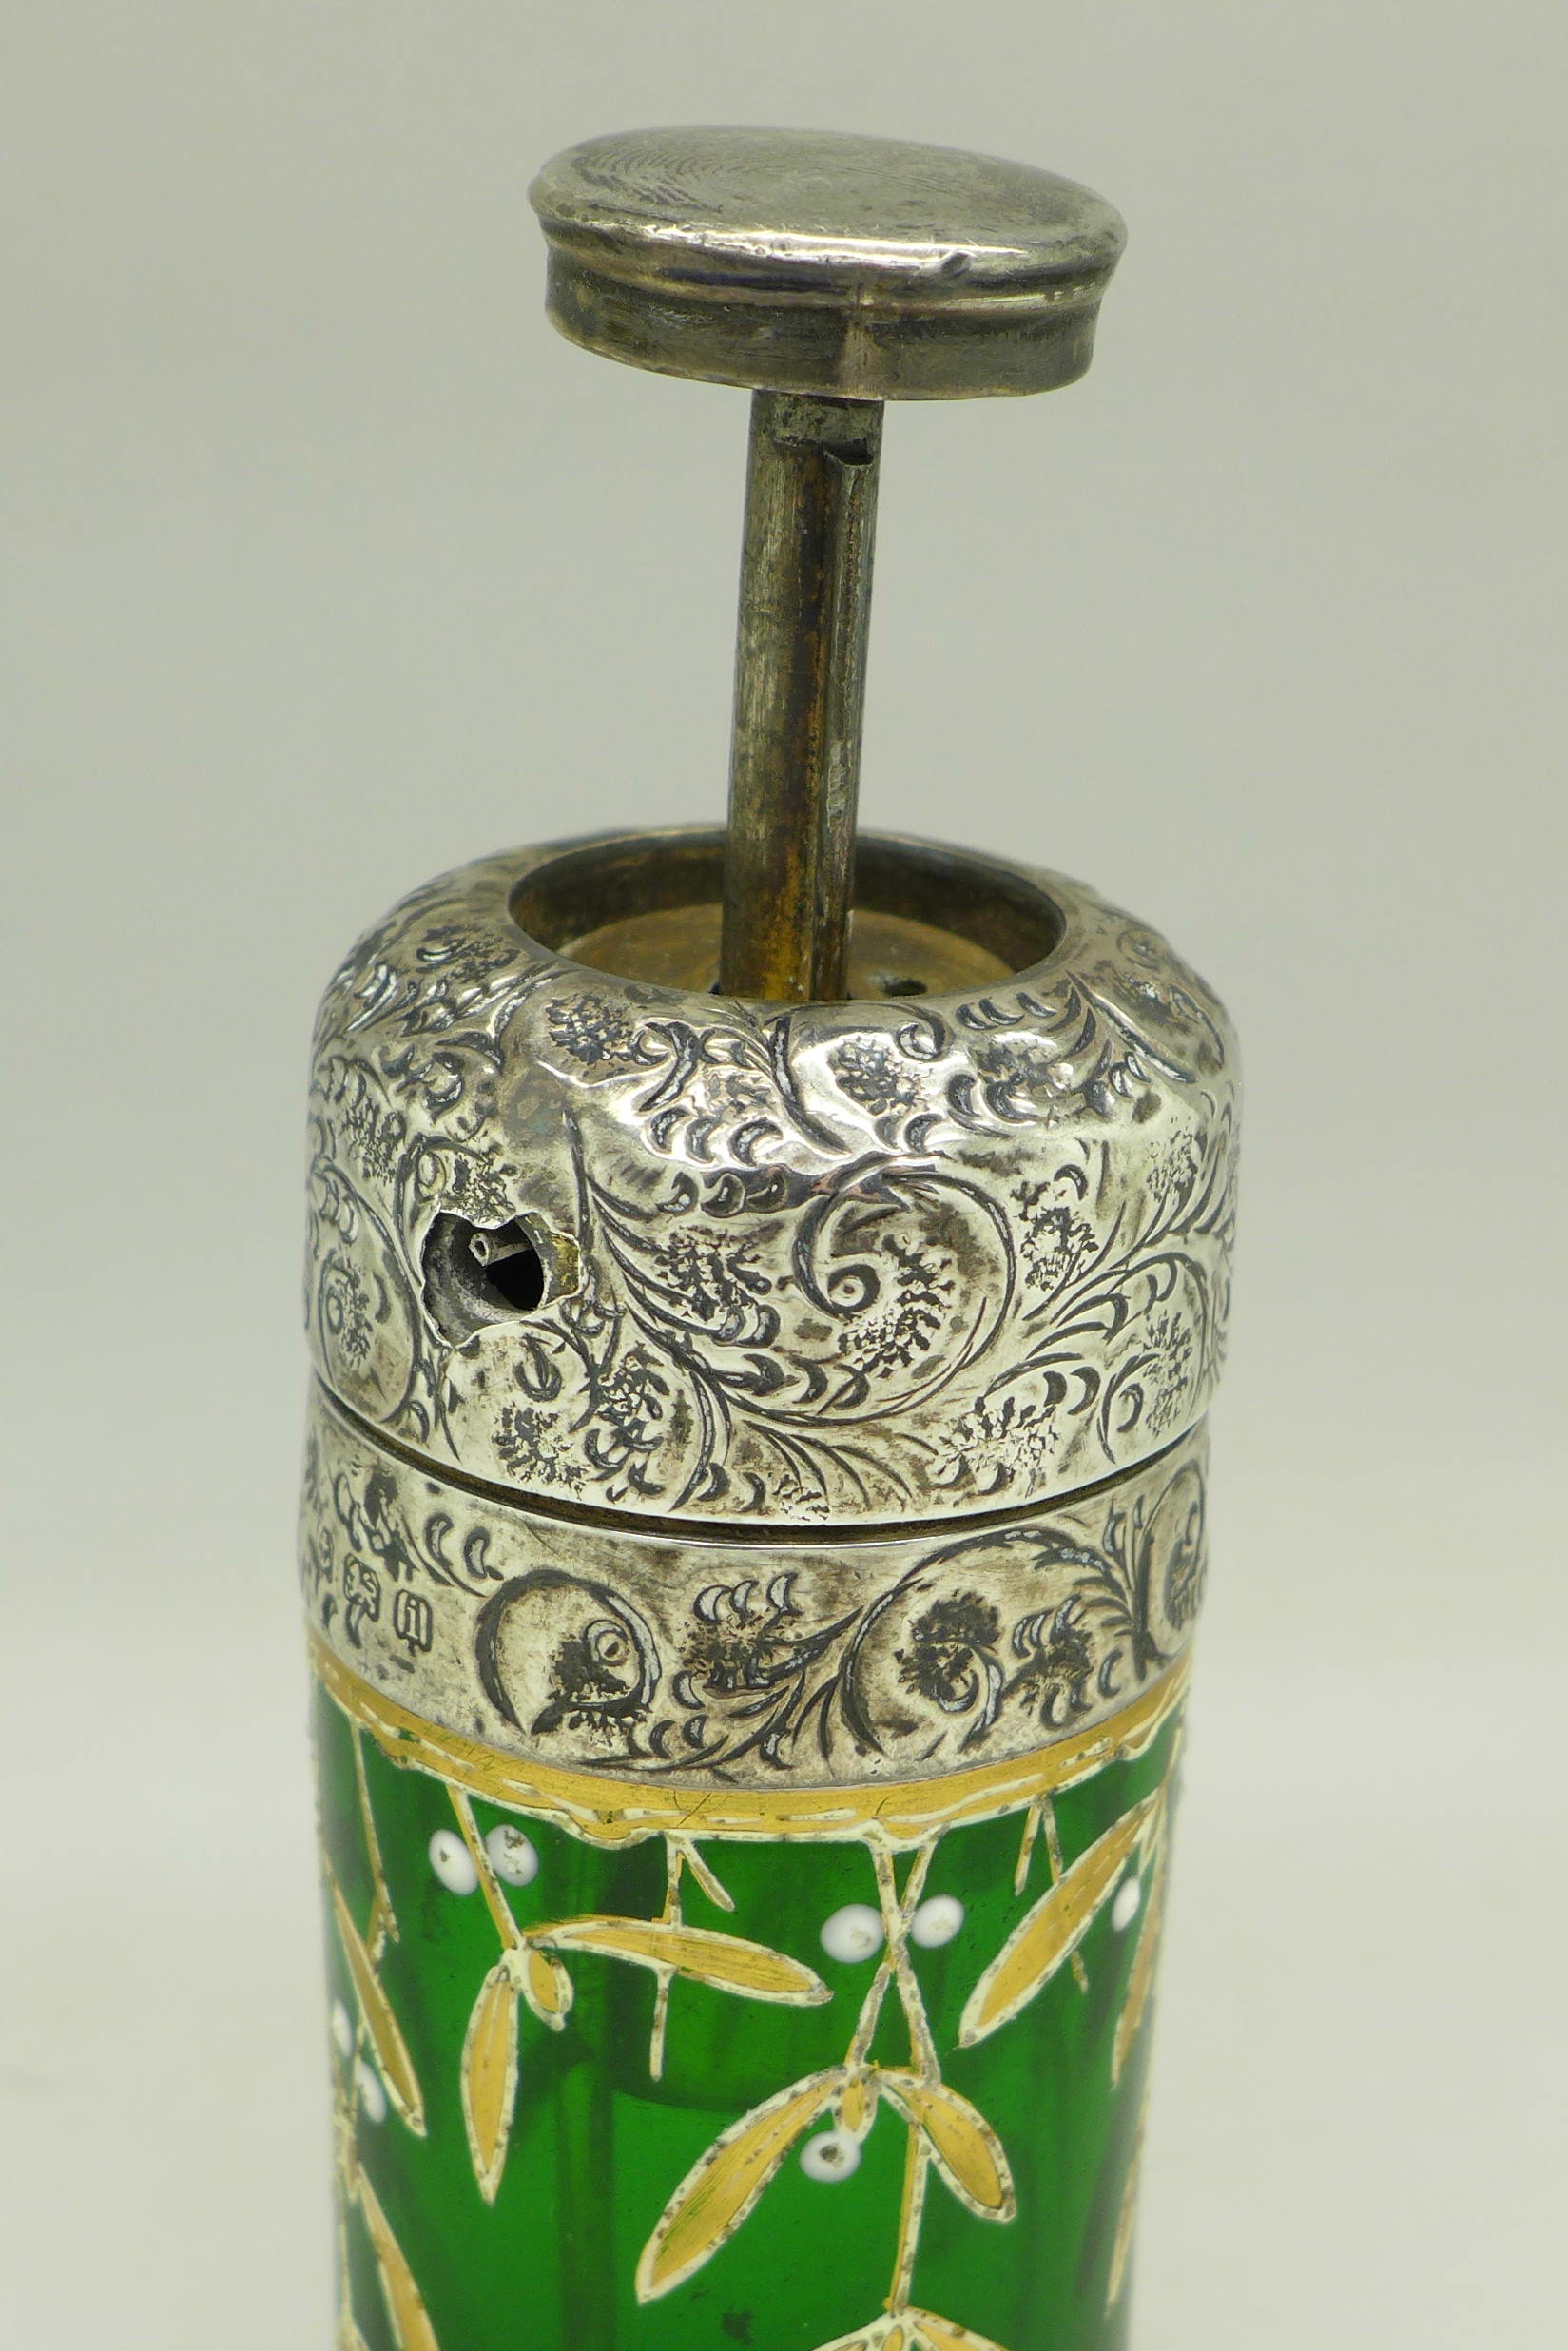 A silver mounted green glass scent bottle - Image 2 of 4